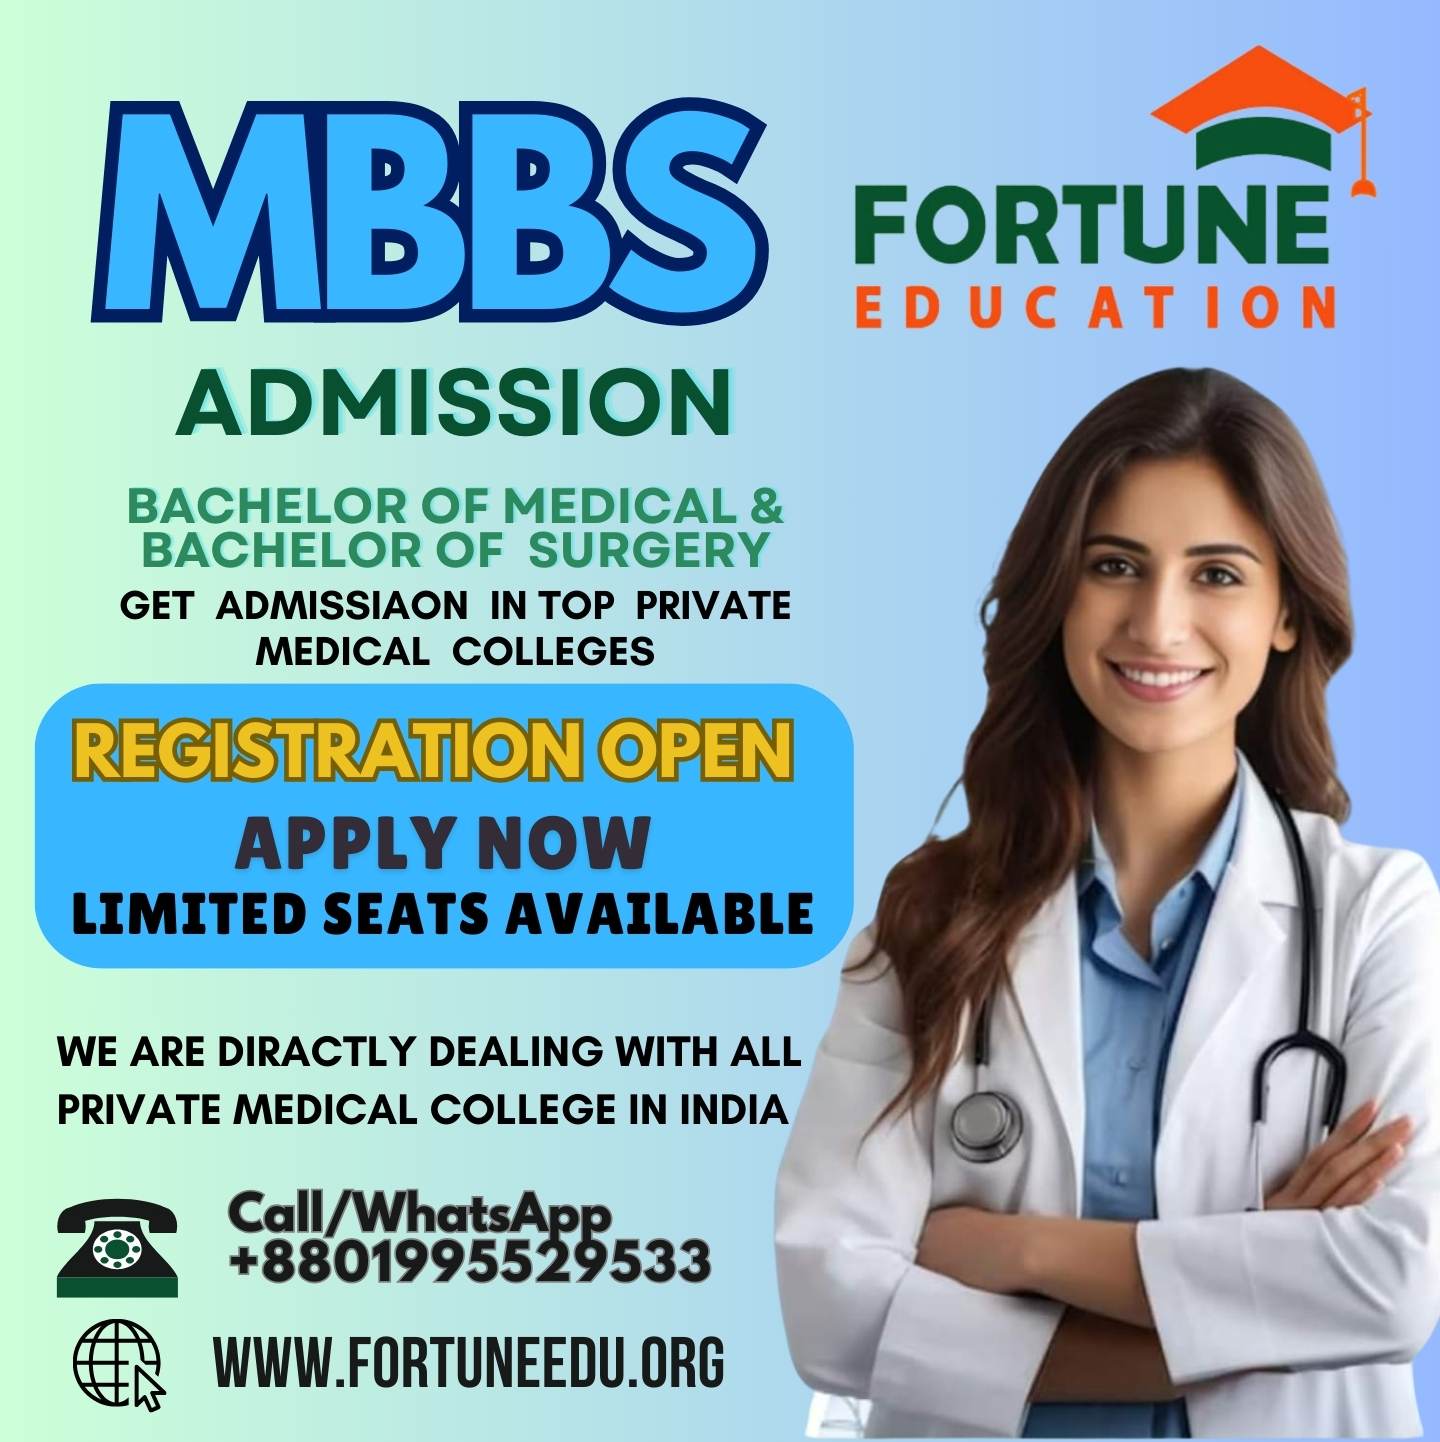 Fortune Education and Services